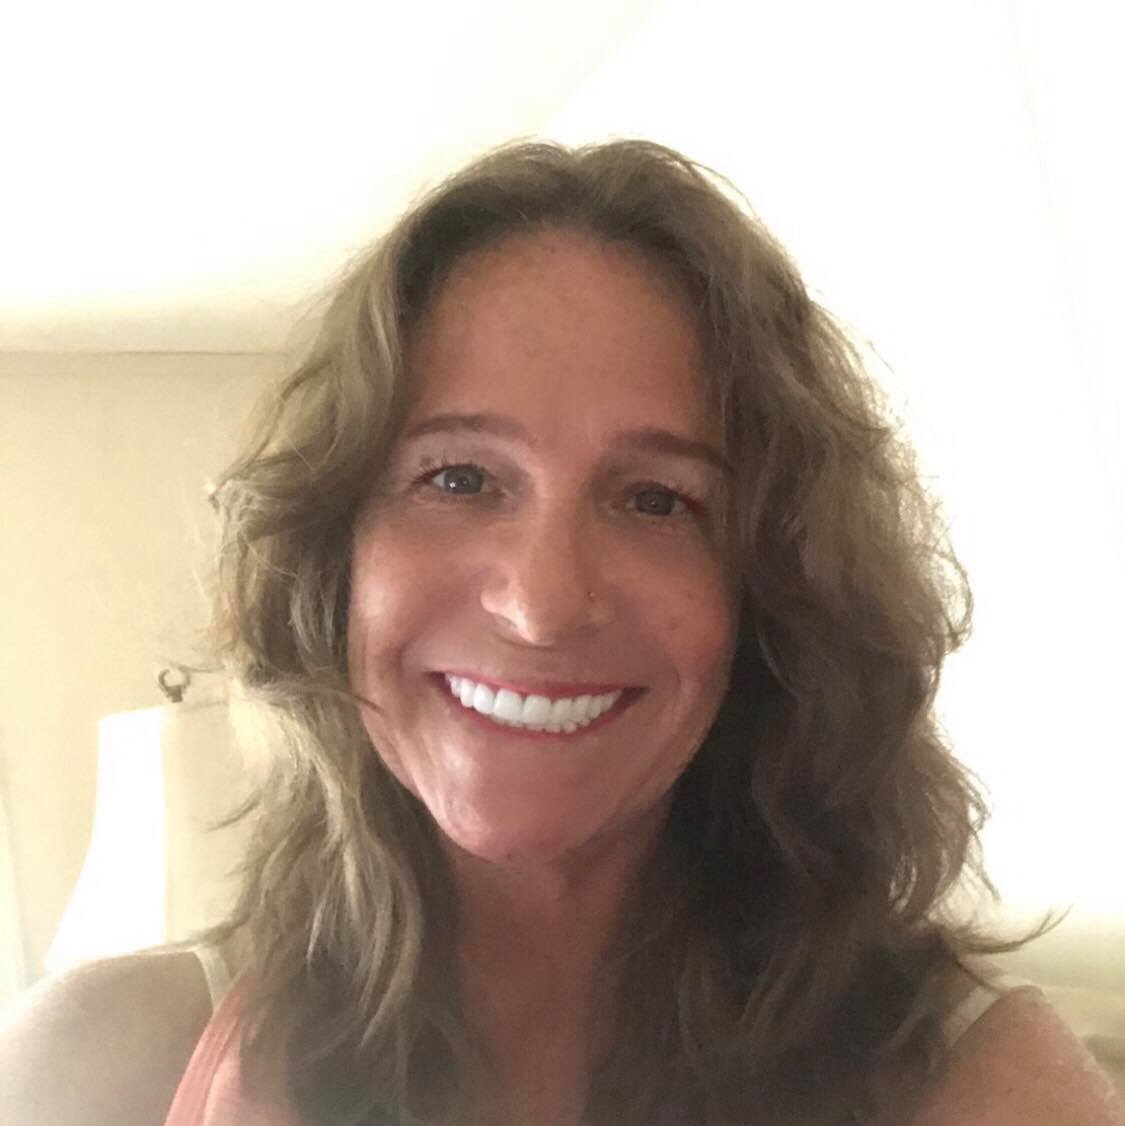 Energy Healing | Summer Darcy with a huge Smile is a Beautiful lady from the Great State of Texas! | Summer Did an Emotional Healing session with me over the phone on how to Deal with Narcissist abuse!